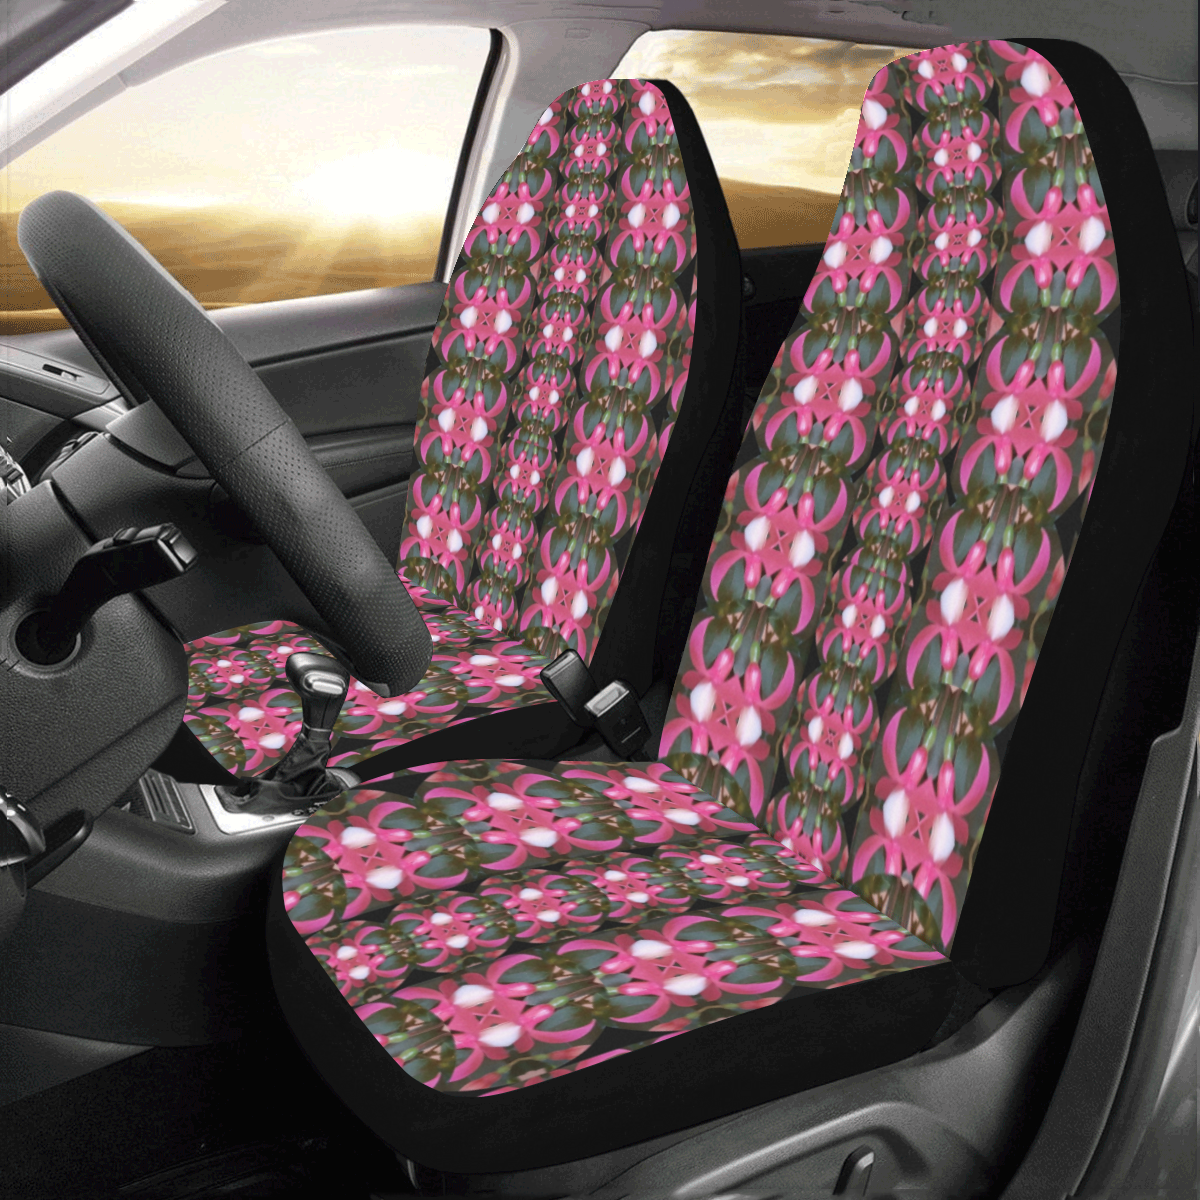 Butterflies in a  forest of climbing flowers Car Seat Covers (Set of 2)